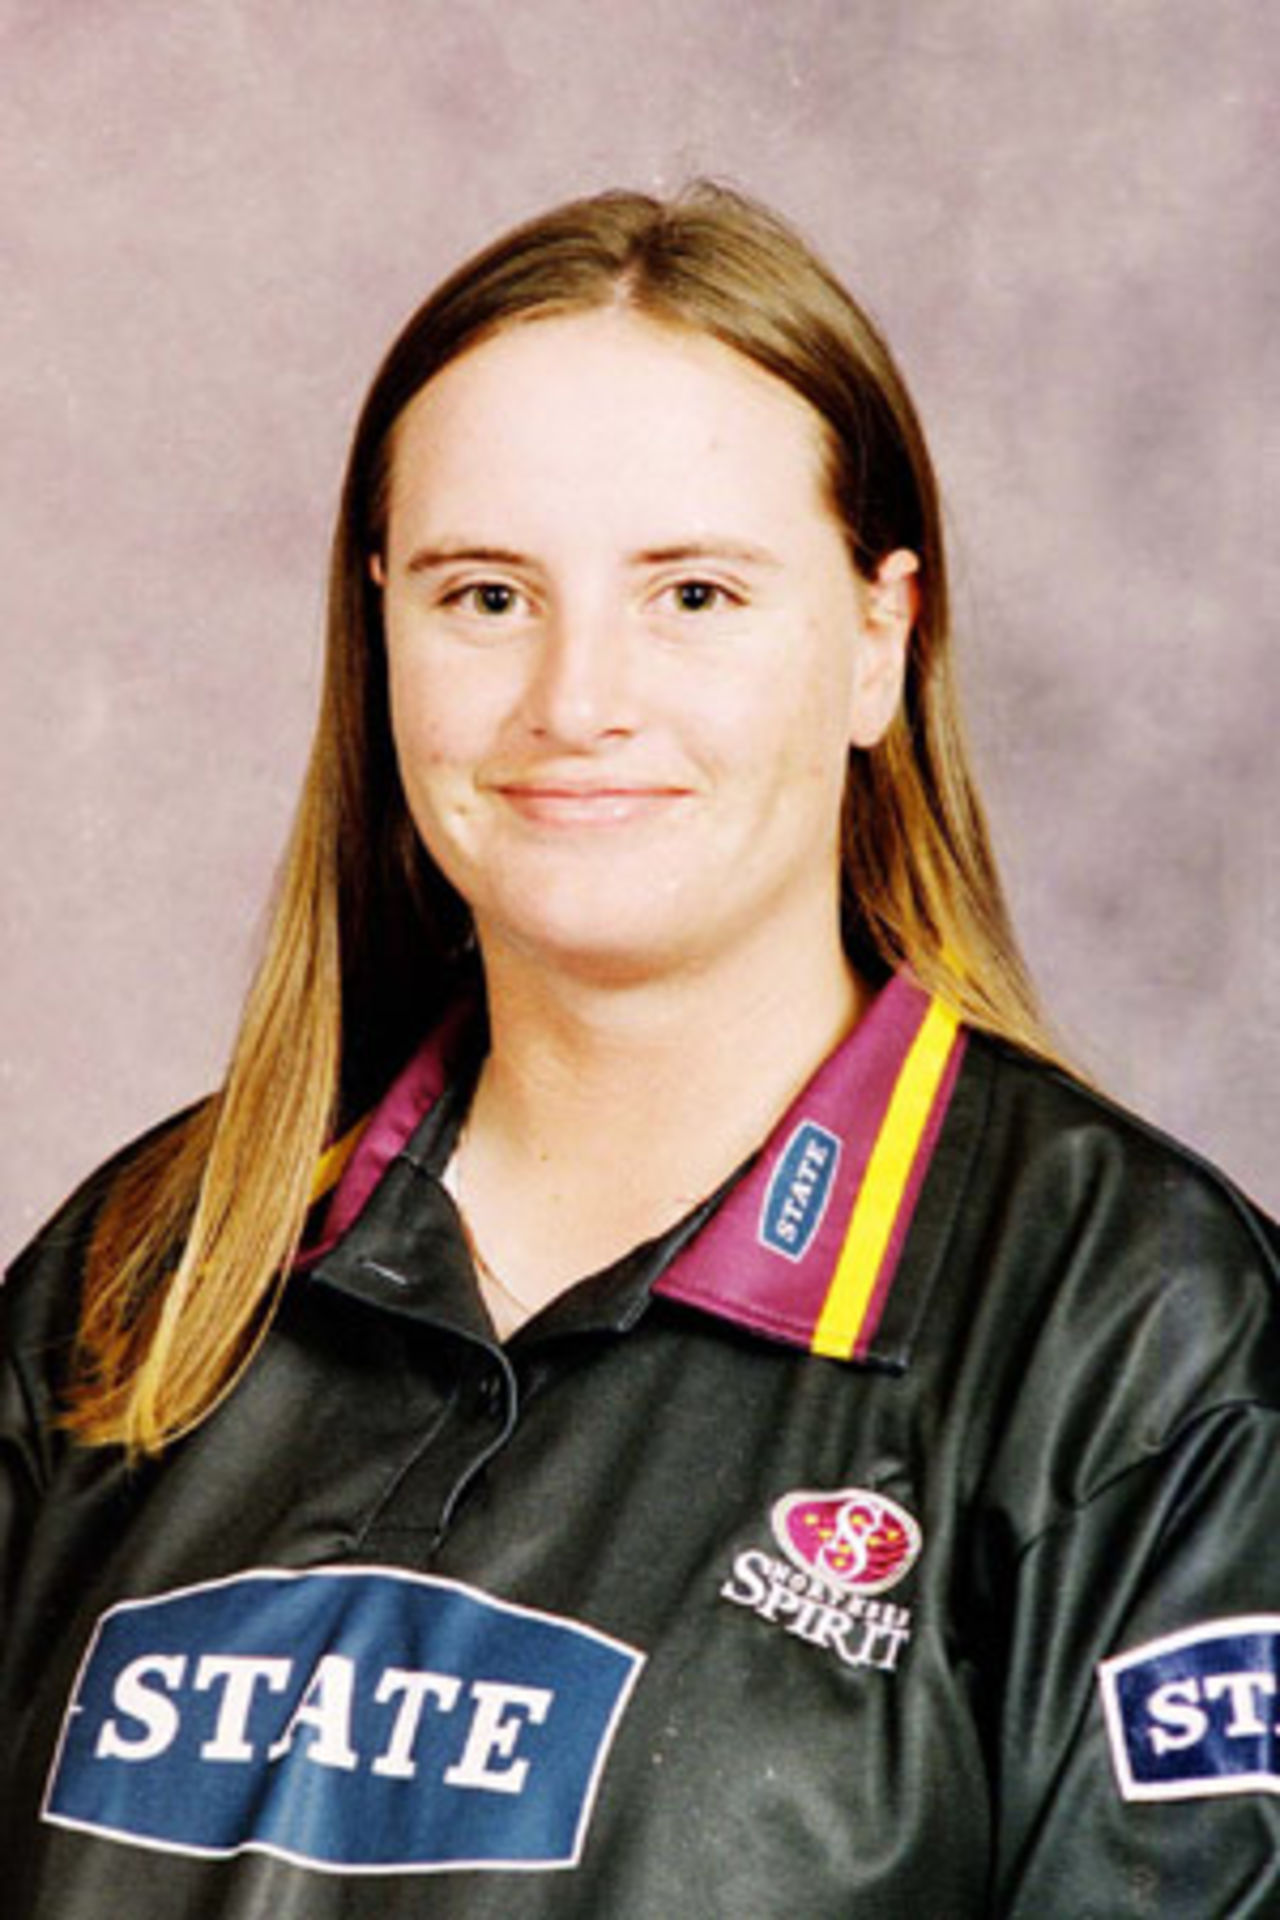 Portrait of Janice Fraser, Northern Districts women's player in the 2001/02 season.